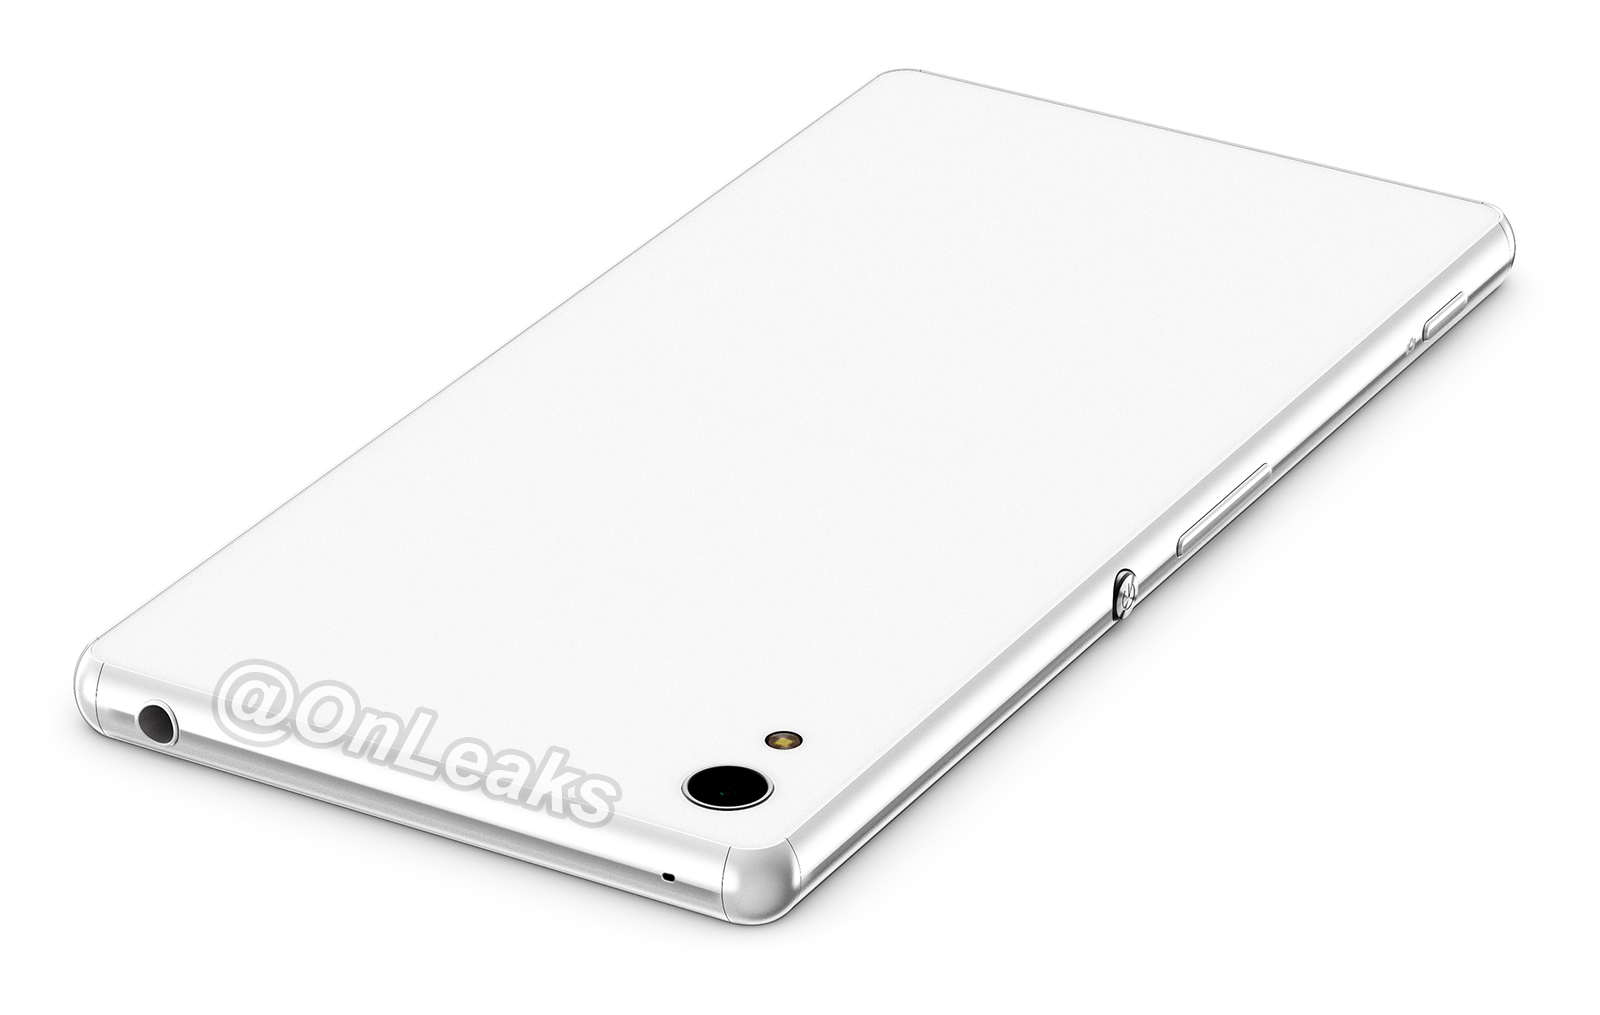 Alleged-Sony-Xperia-Z4-non-final-renders